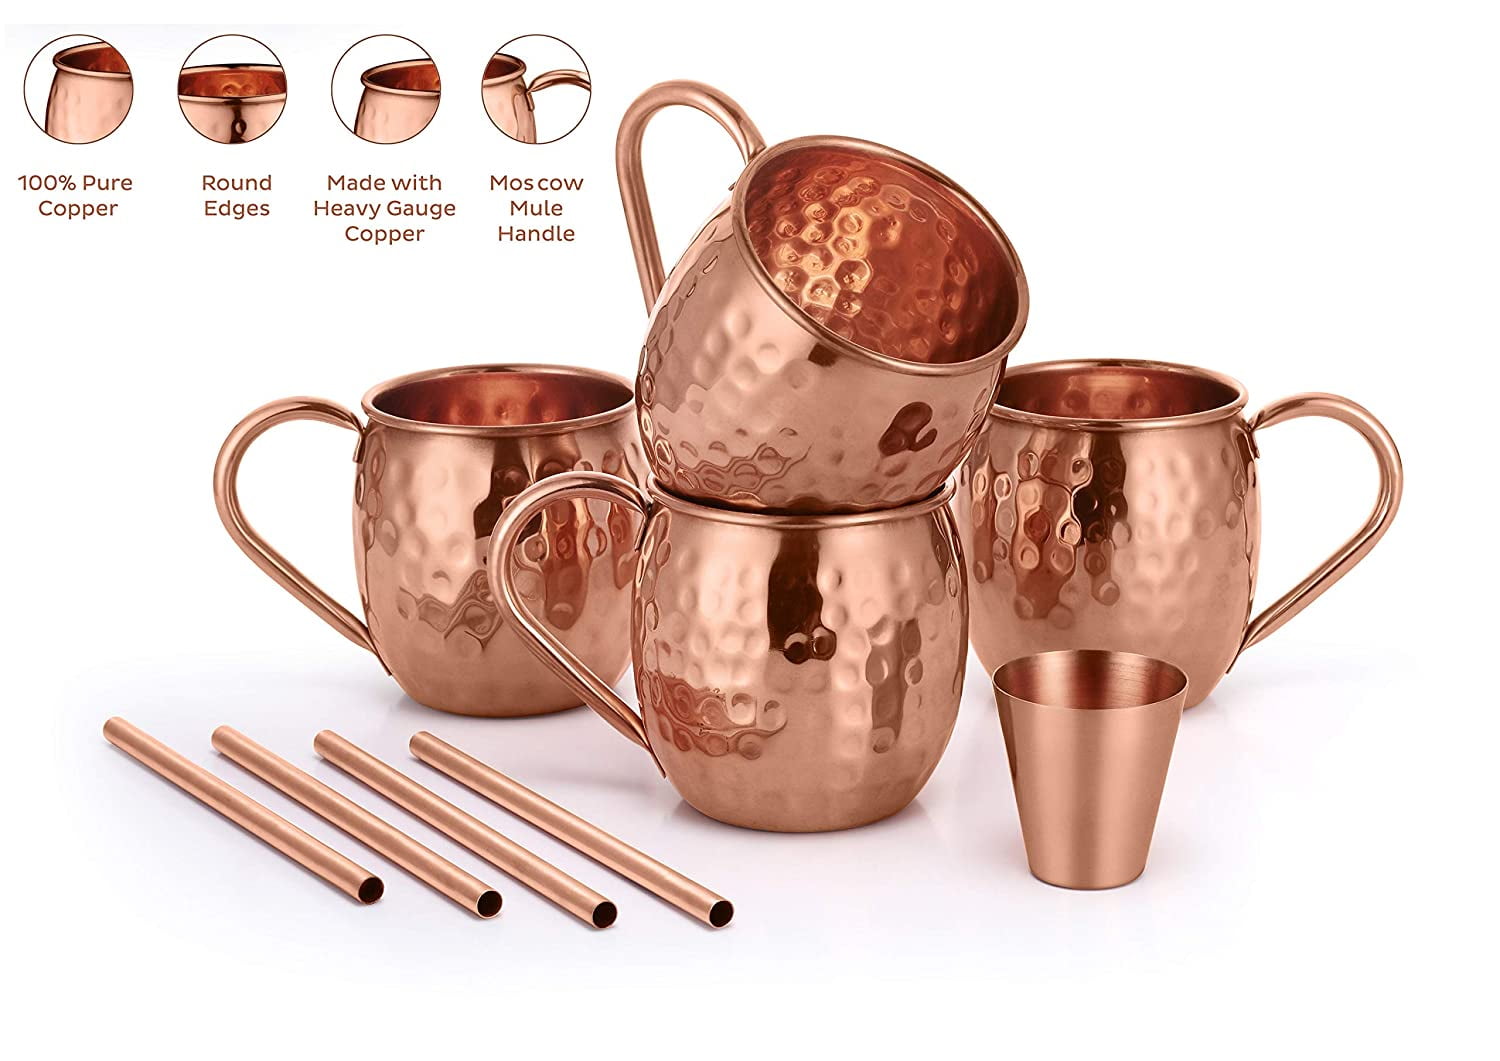 Details more than 160 copper gift set latest